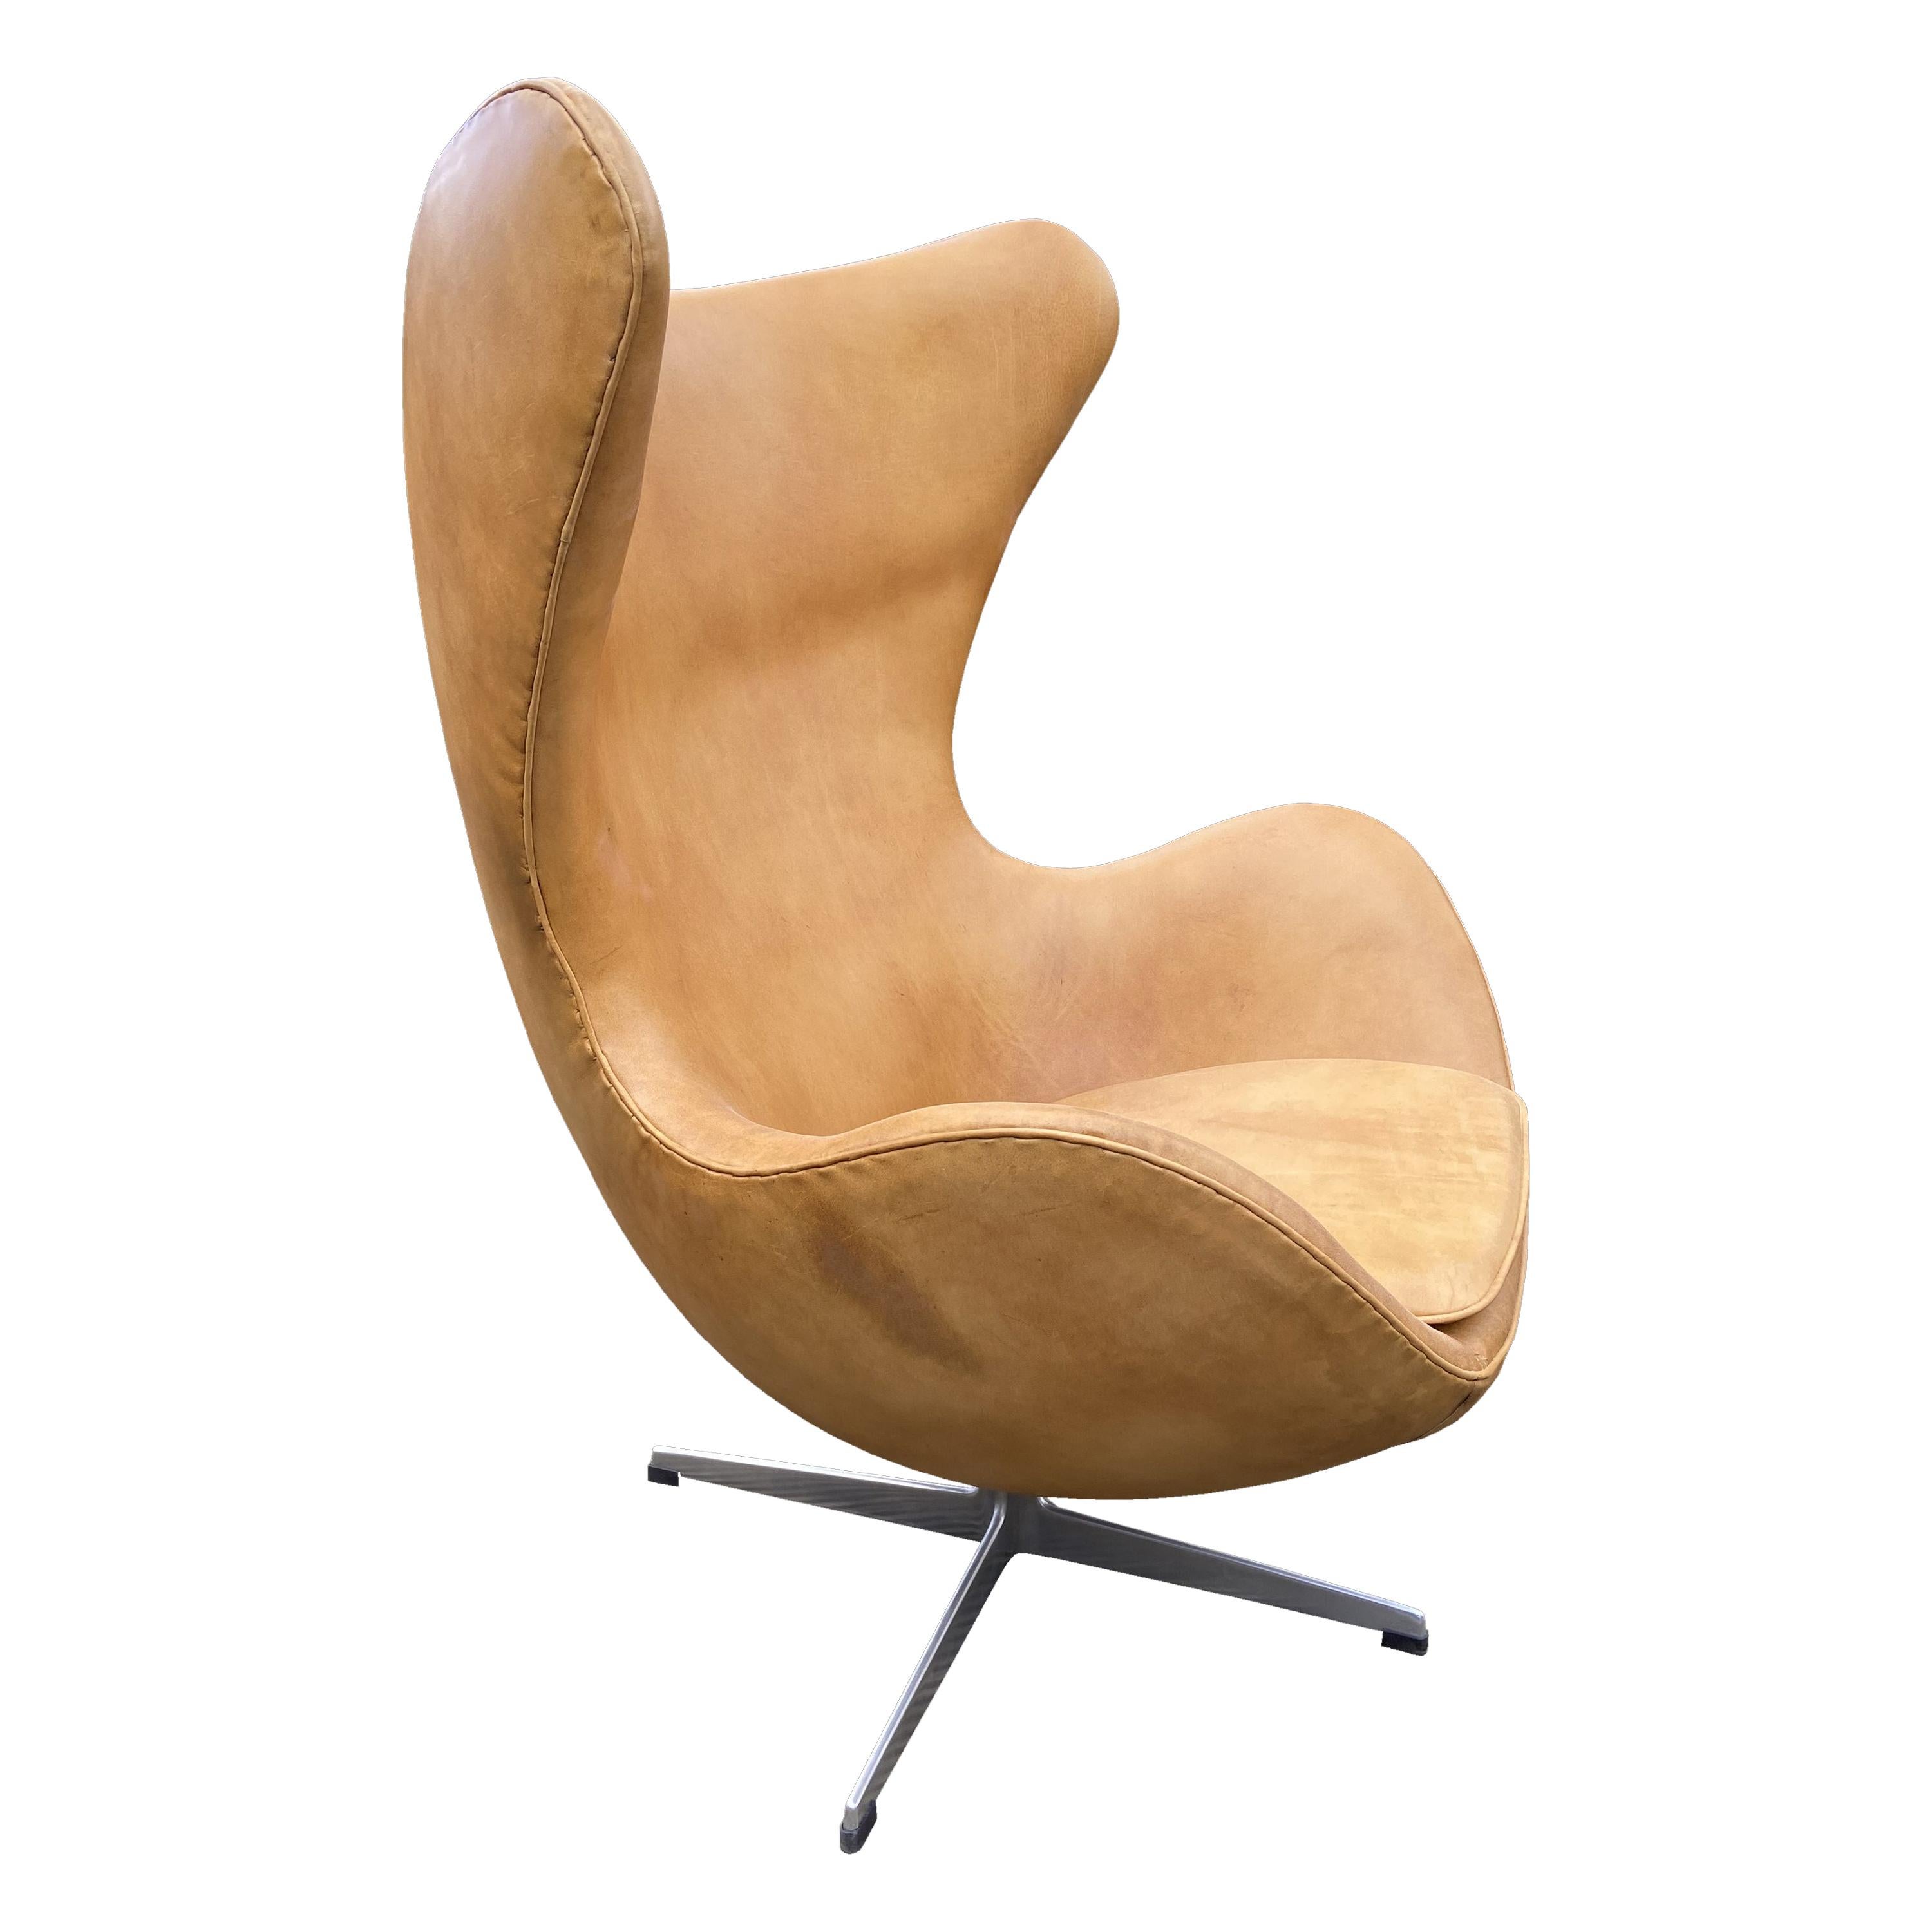 Tan Leather Egg Chair By Arne Jacobsen, Brown Leather Egg Chair